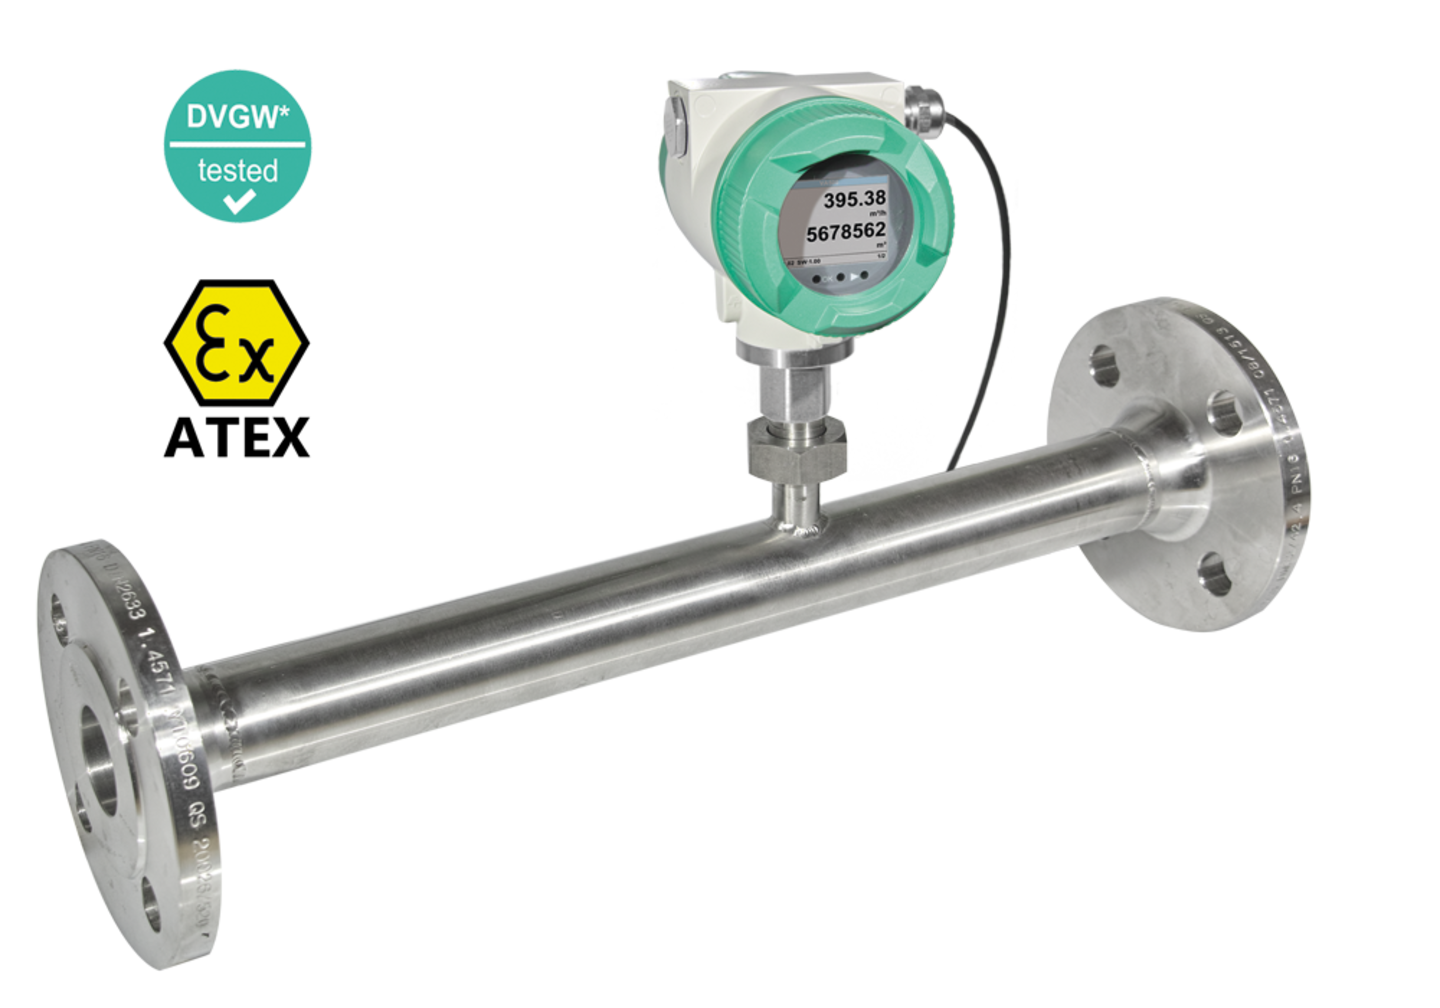 VA 570 - Thermal mass flow meter with integrated measuring section and ATEX and DVGW approval